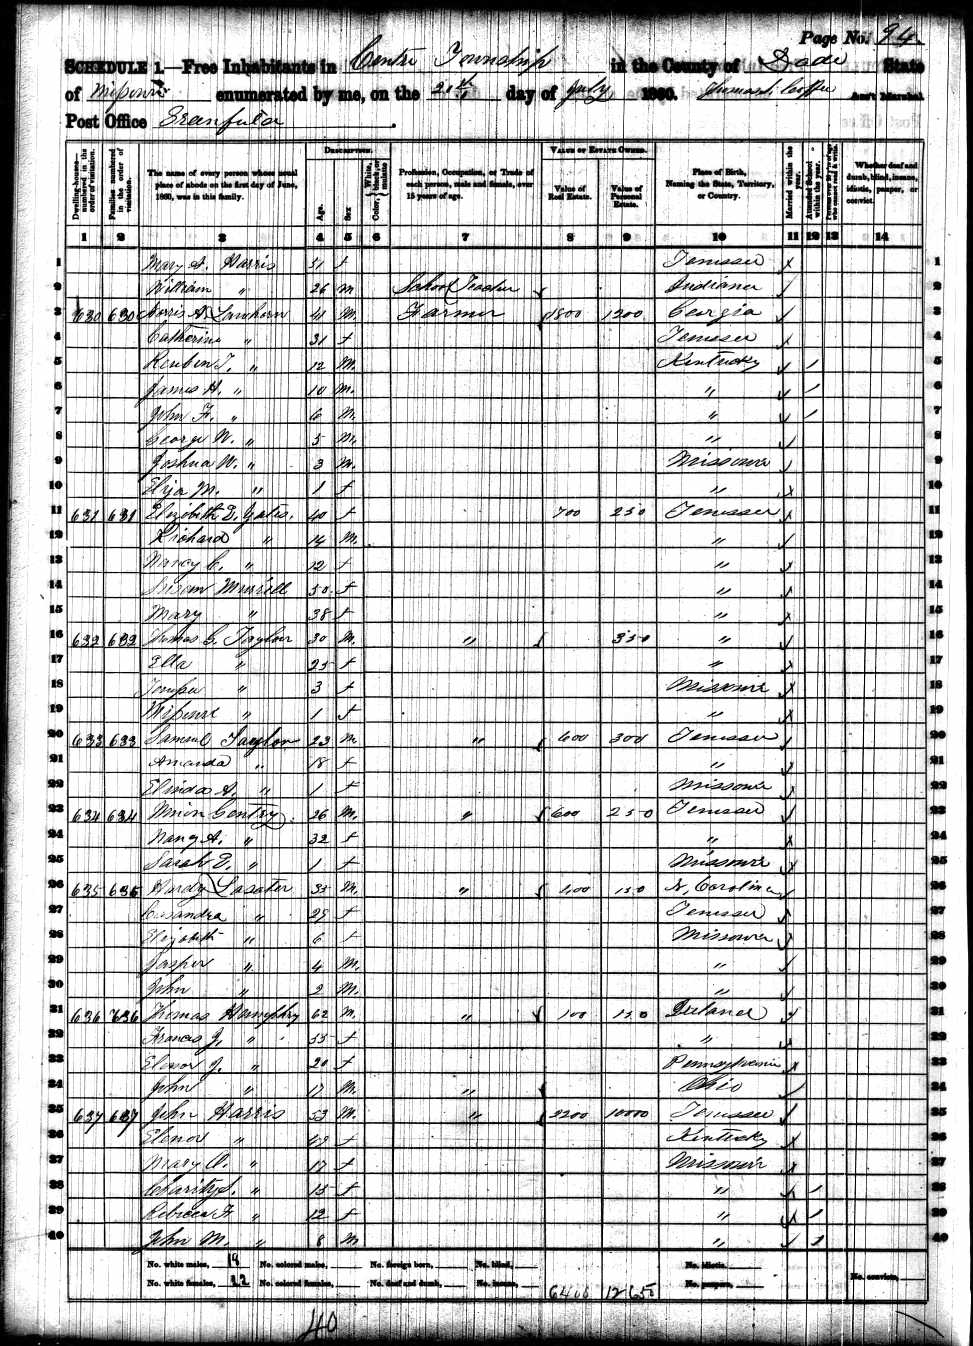 Hardy and Sarah C. 'Cassie' Lasater, 1860 Dade County, Missouri, census